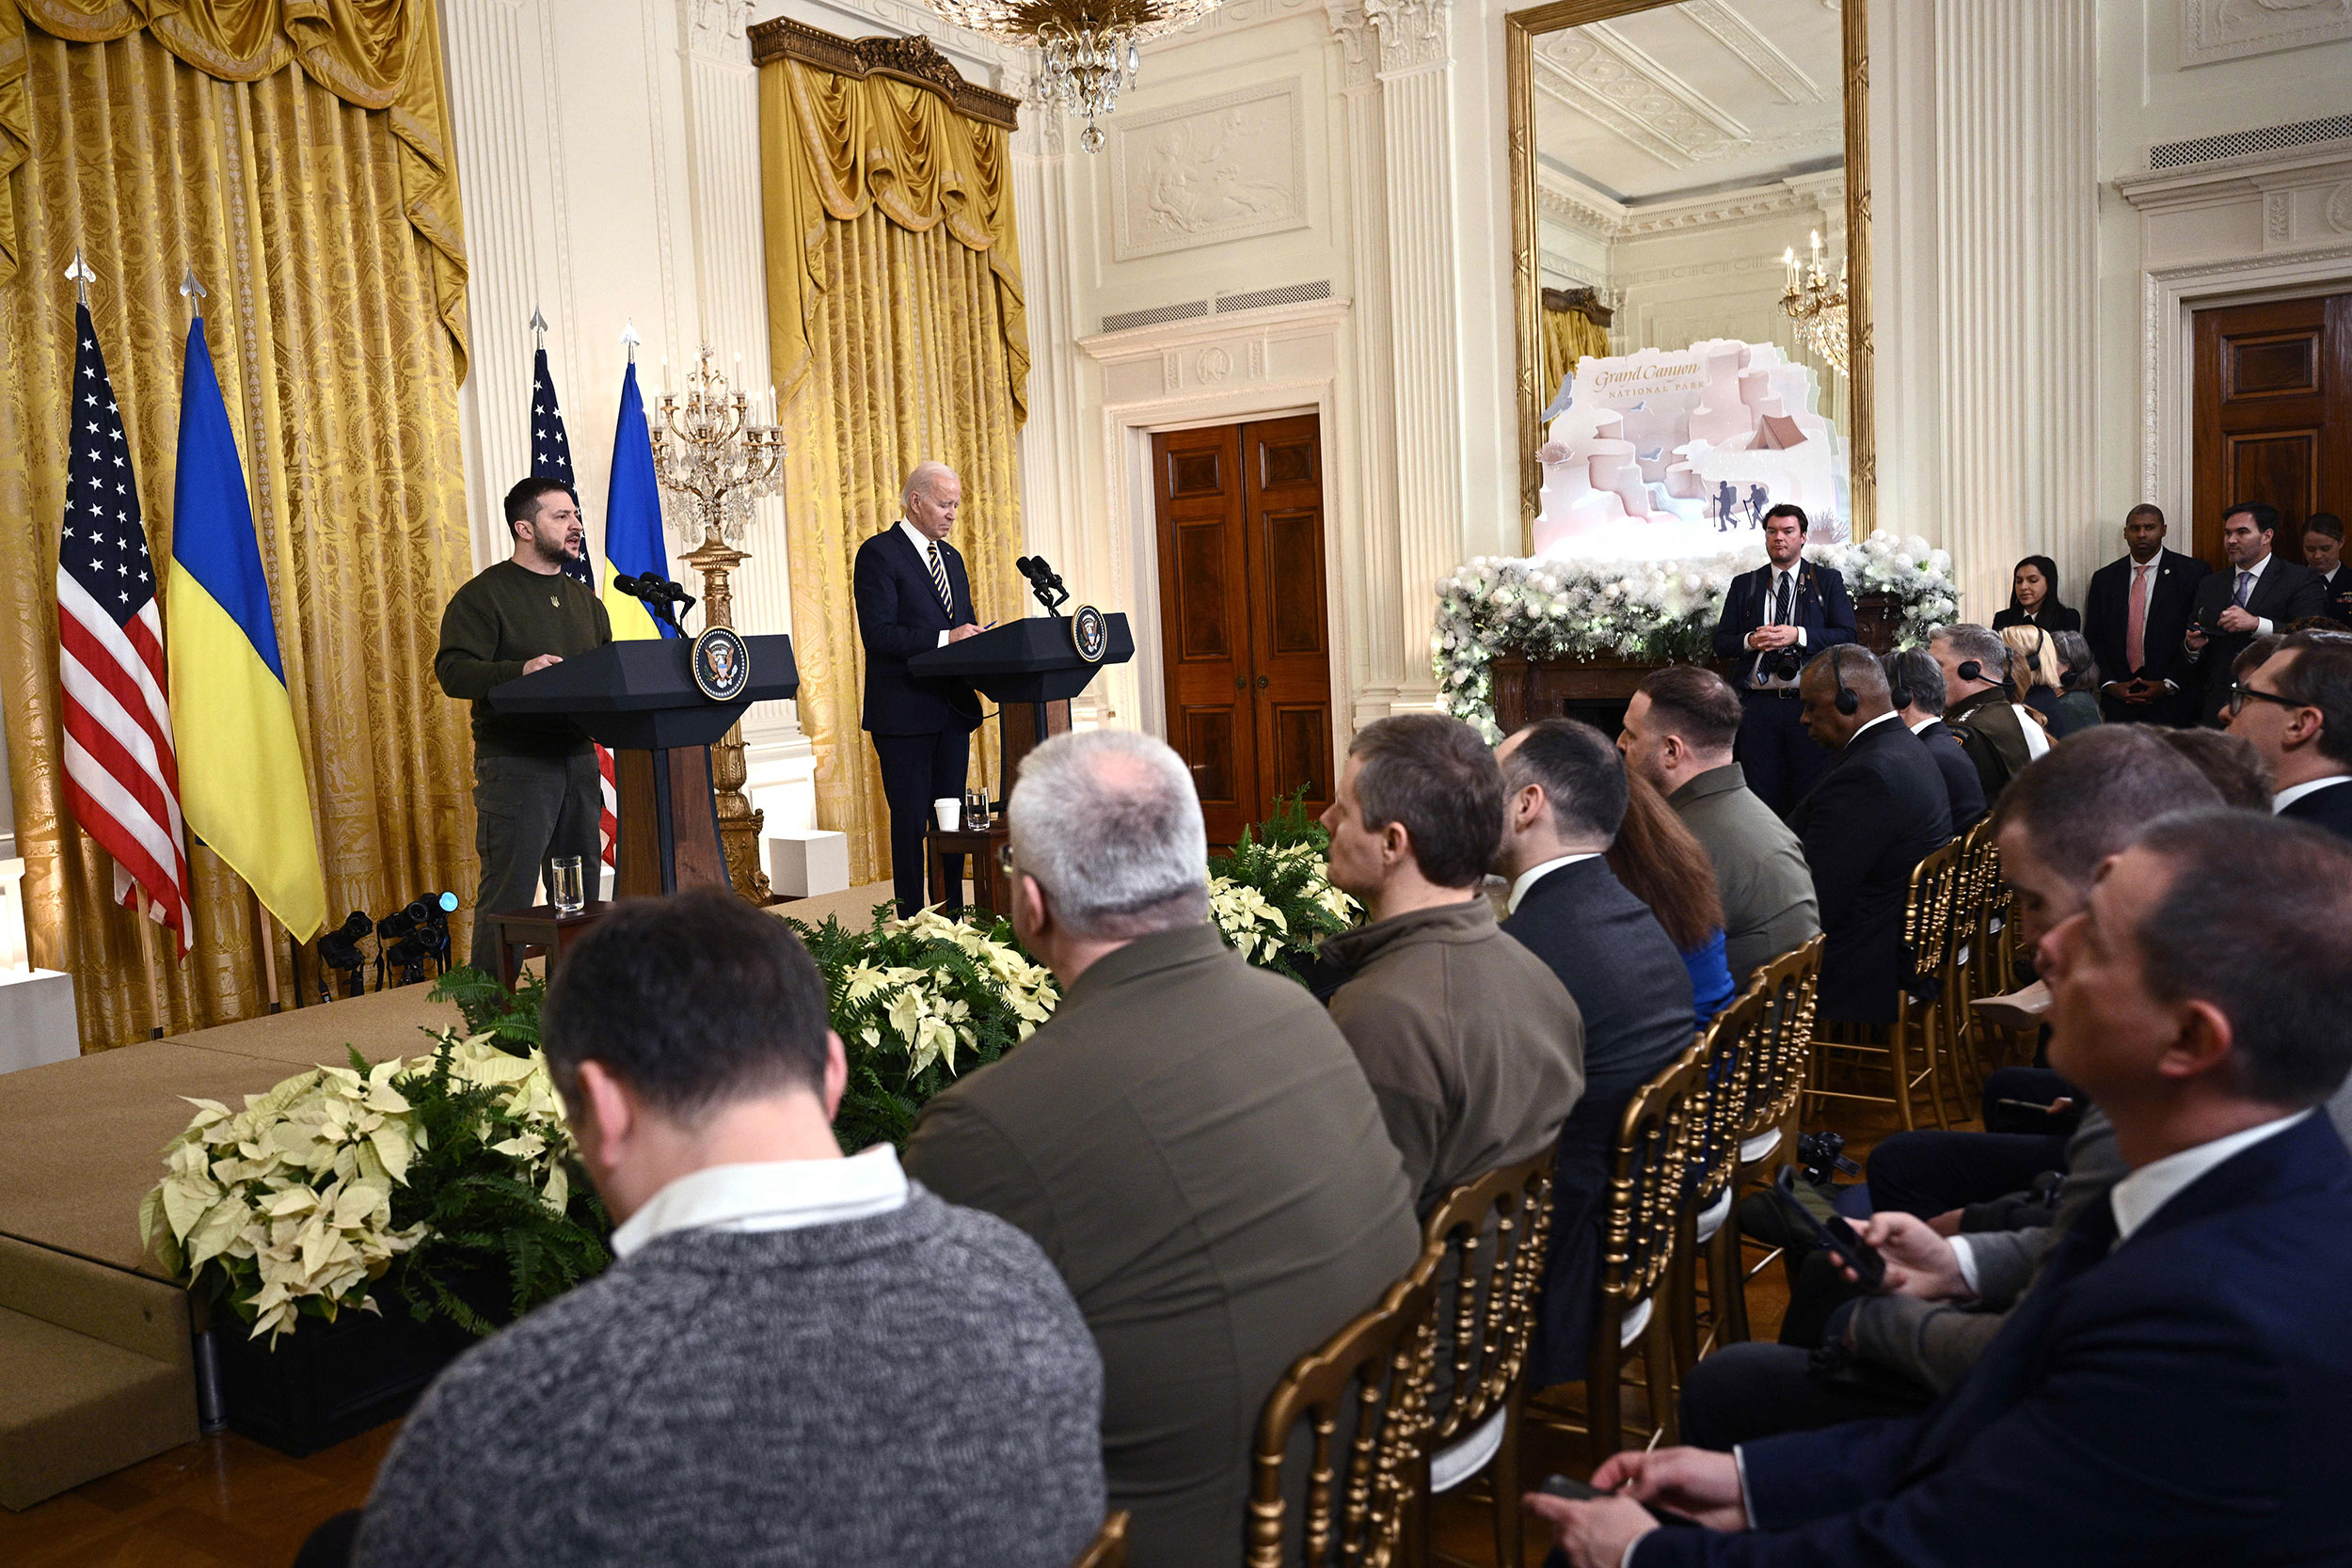 Ukraine’s President Volodymyr Zelensky speaks during a joint press conference with US President Joe Biden at the White House on Wednesday.